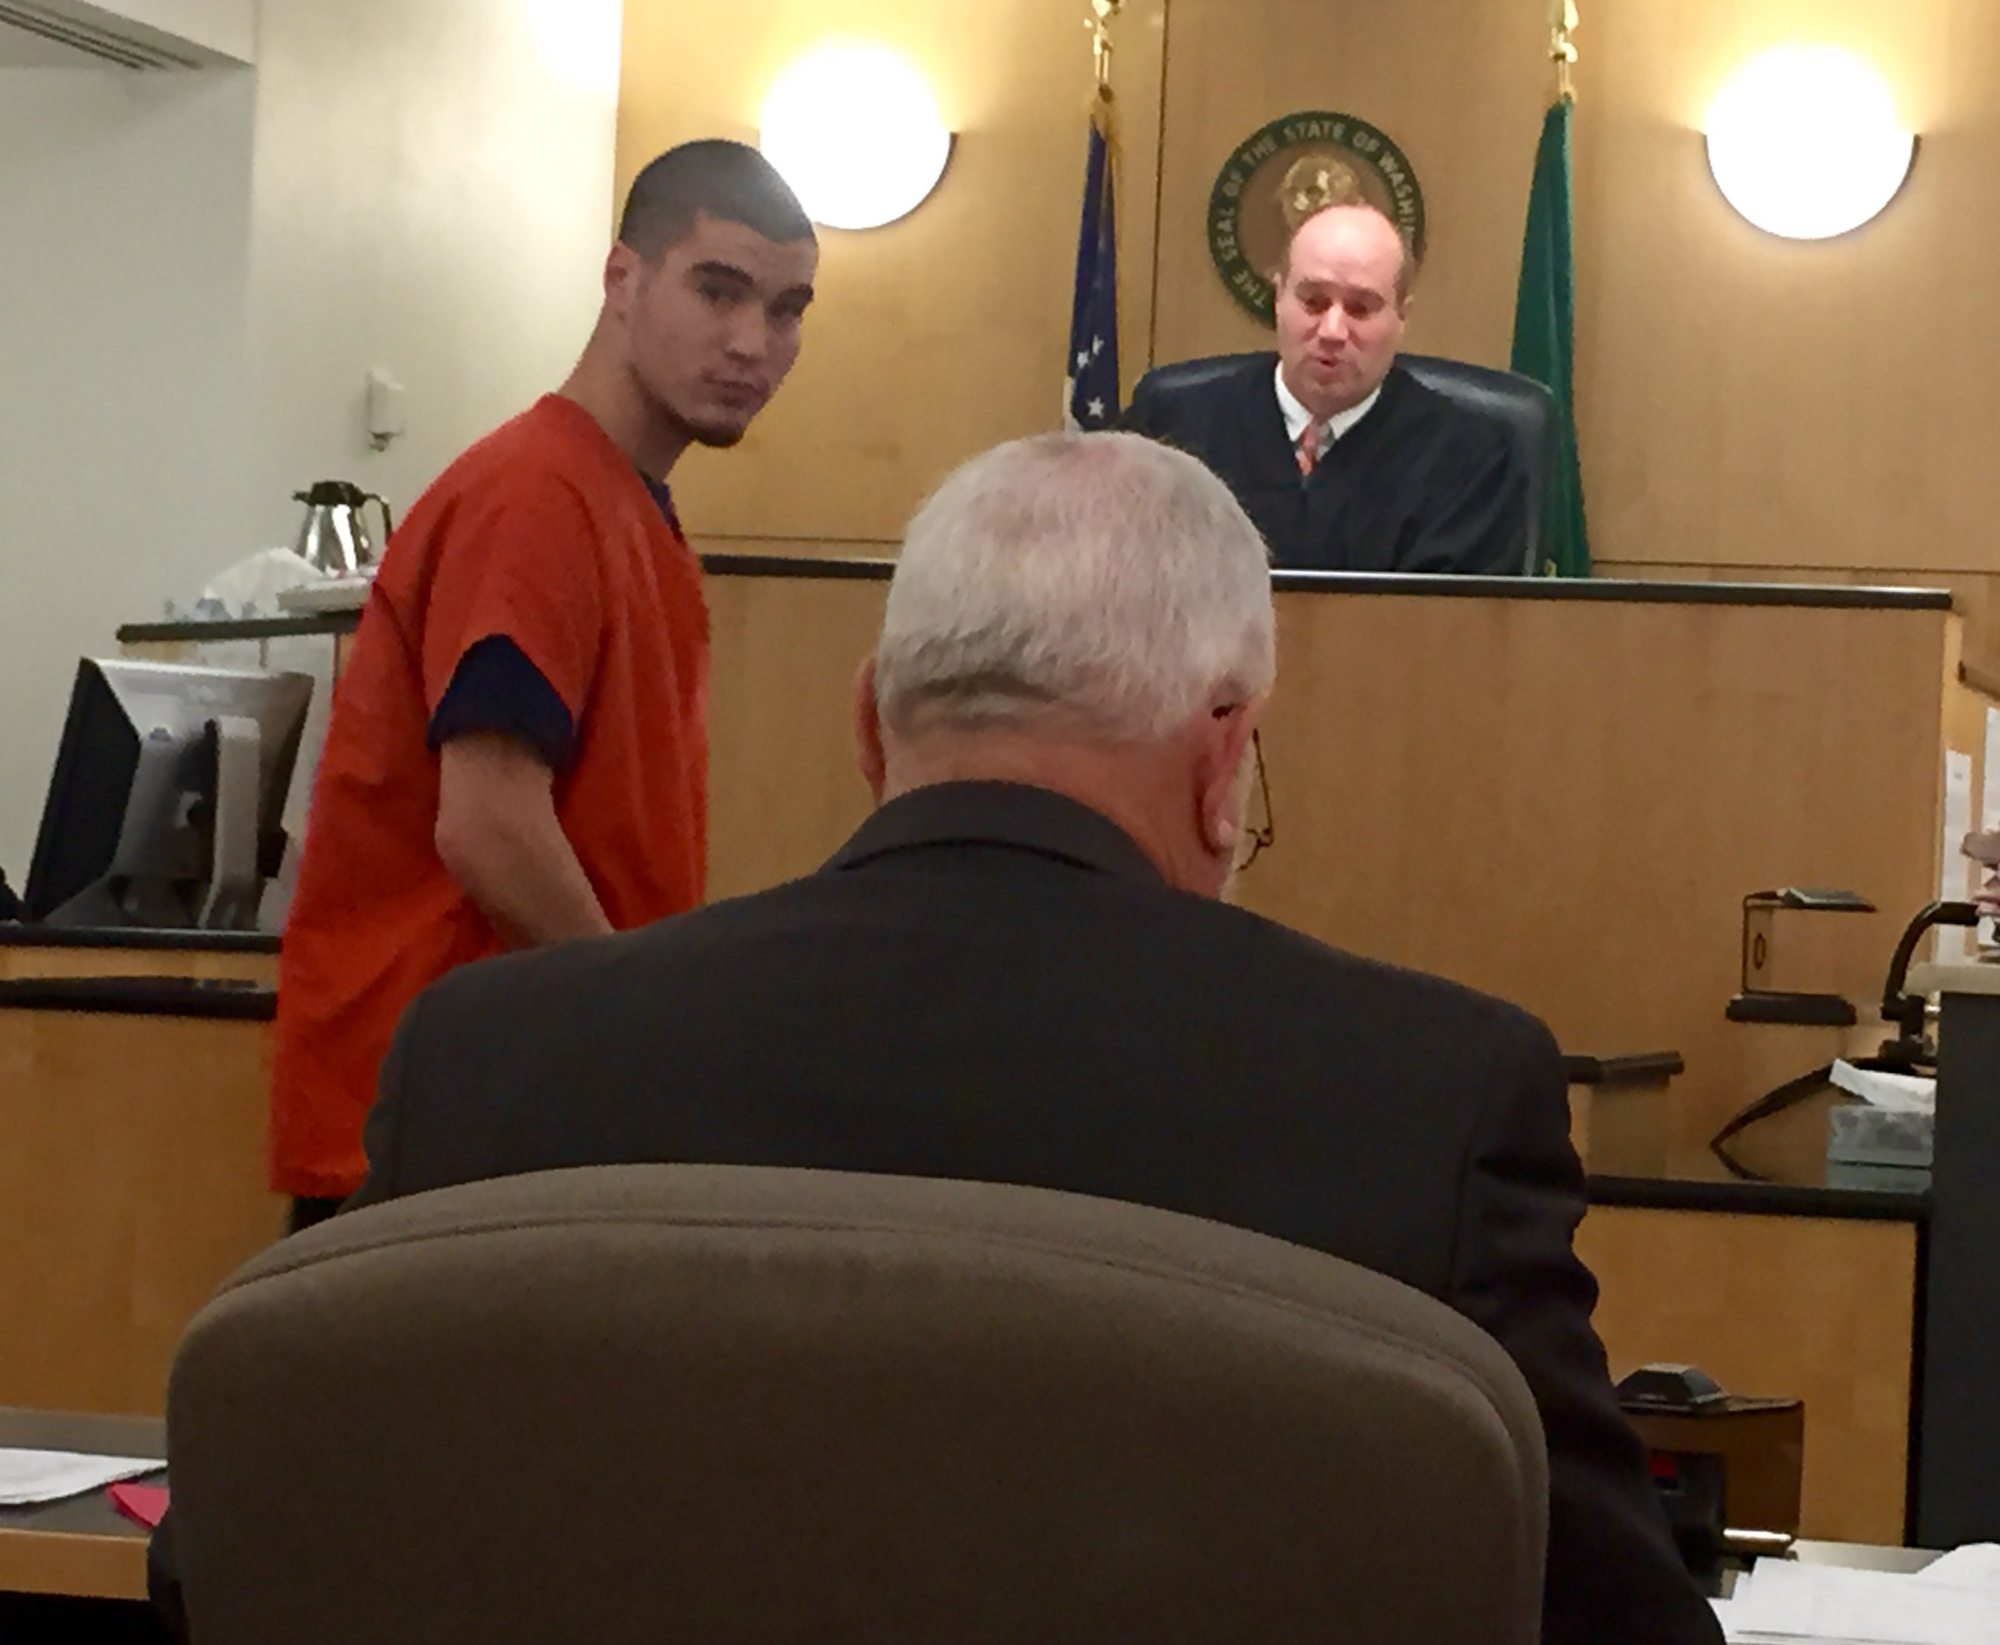 Spencer Pell, 19, left, makes a first appearance Wednesday in Clark County Superior Court on suspicion of first-degree assault stemming from an altercation in April that left a man in a coma. Another suspect in the attack was arrested earlier this month.